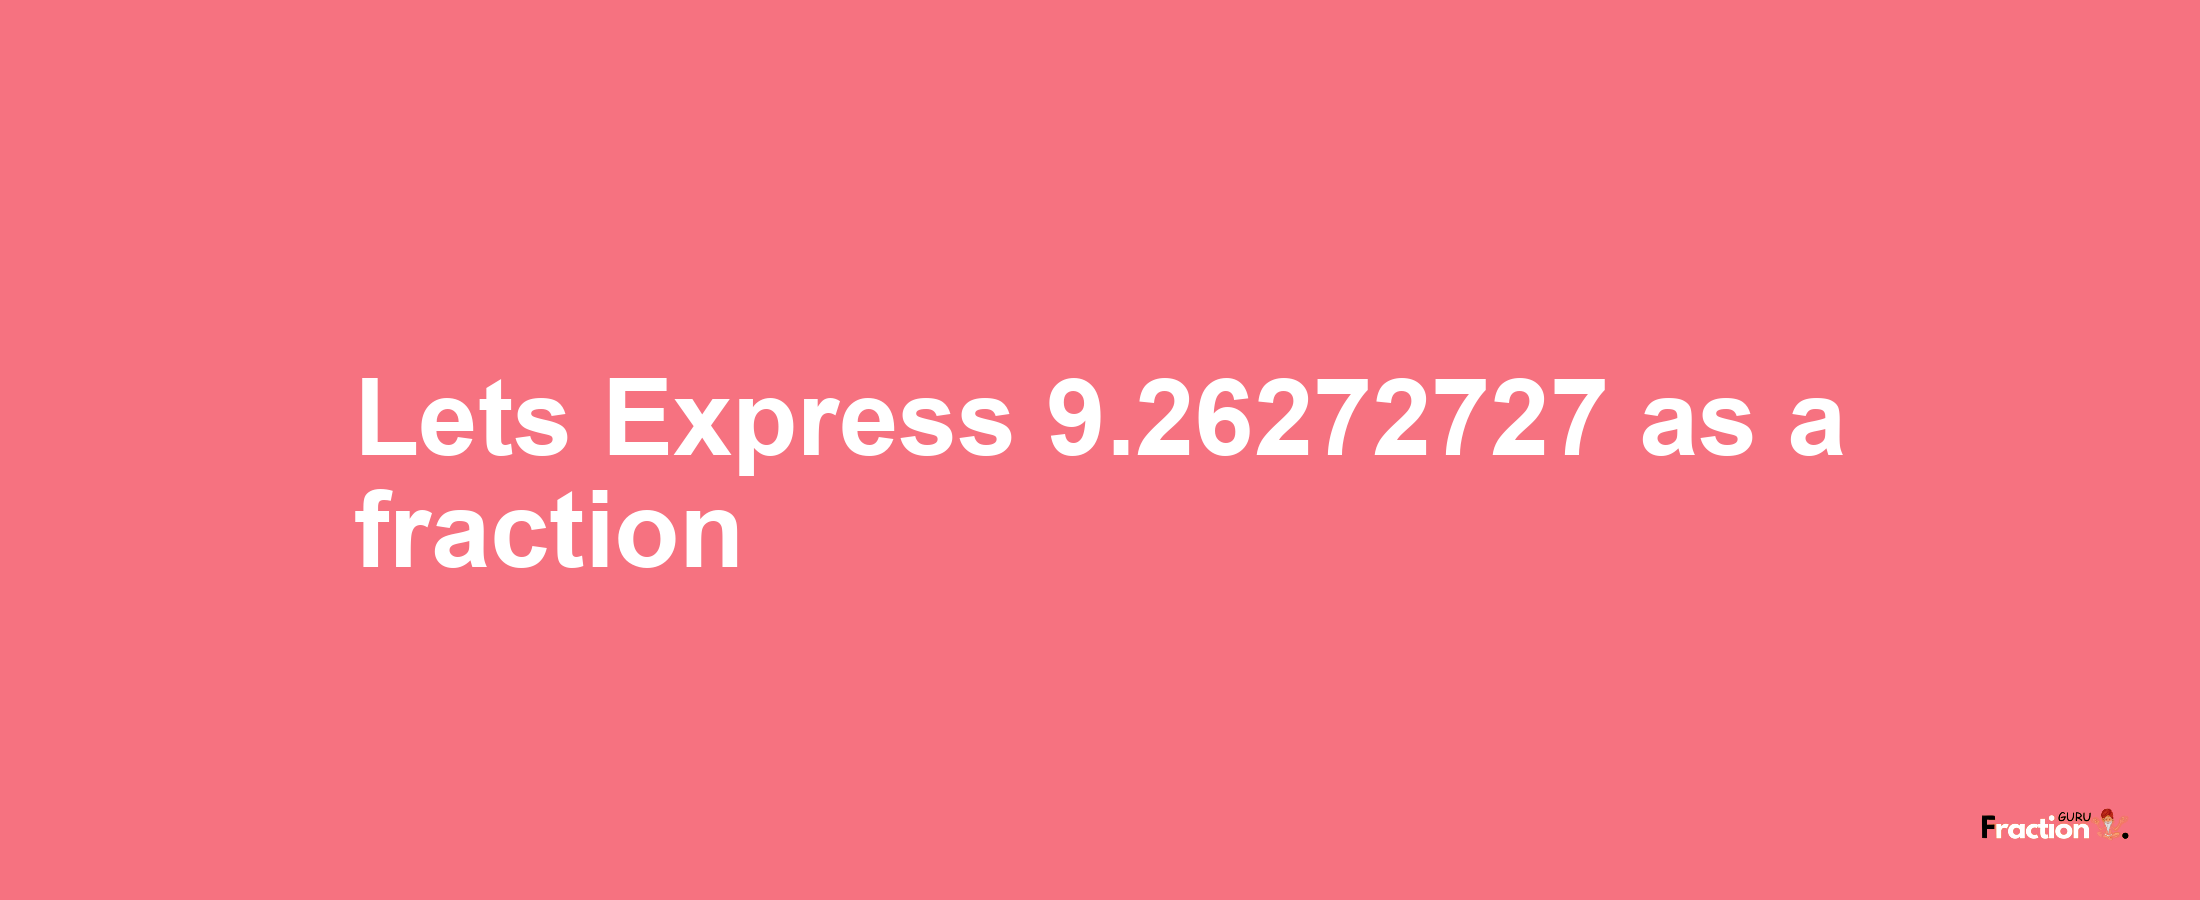 Lets Express 9.26272727 as afraction